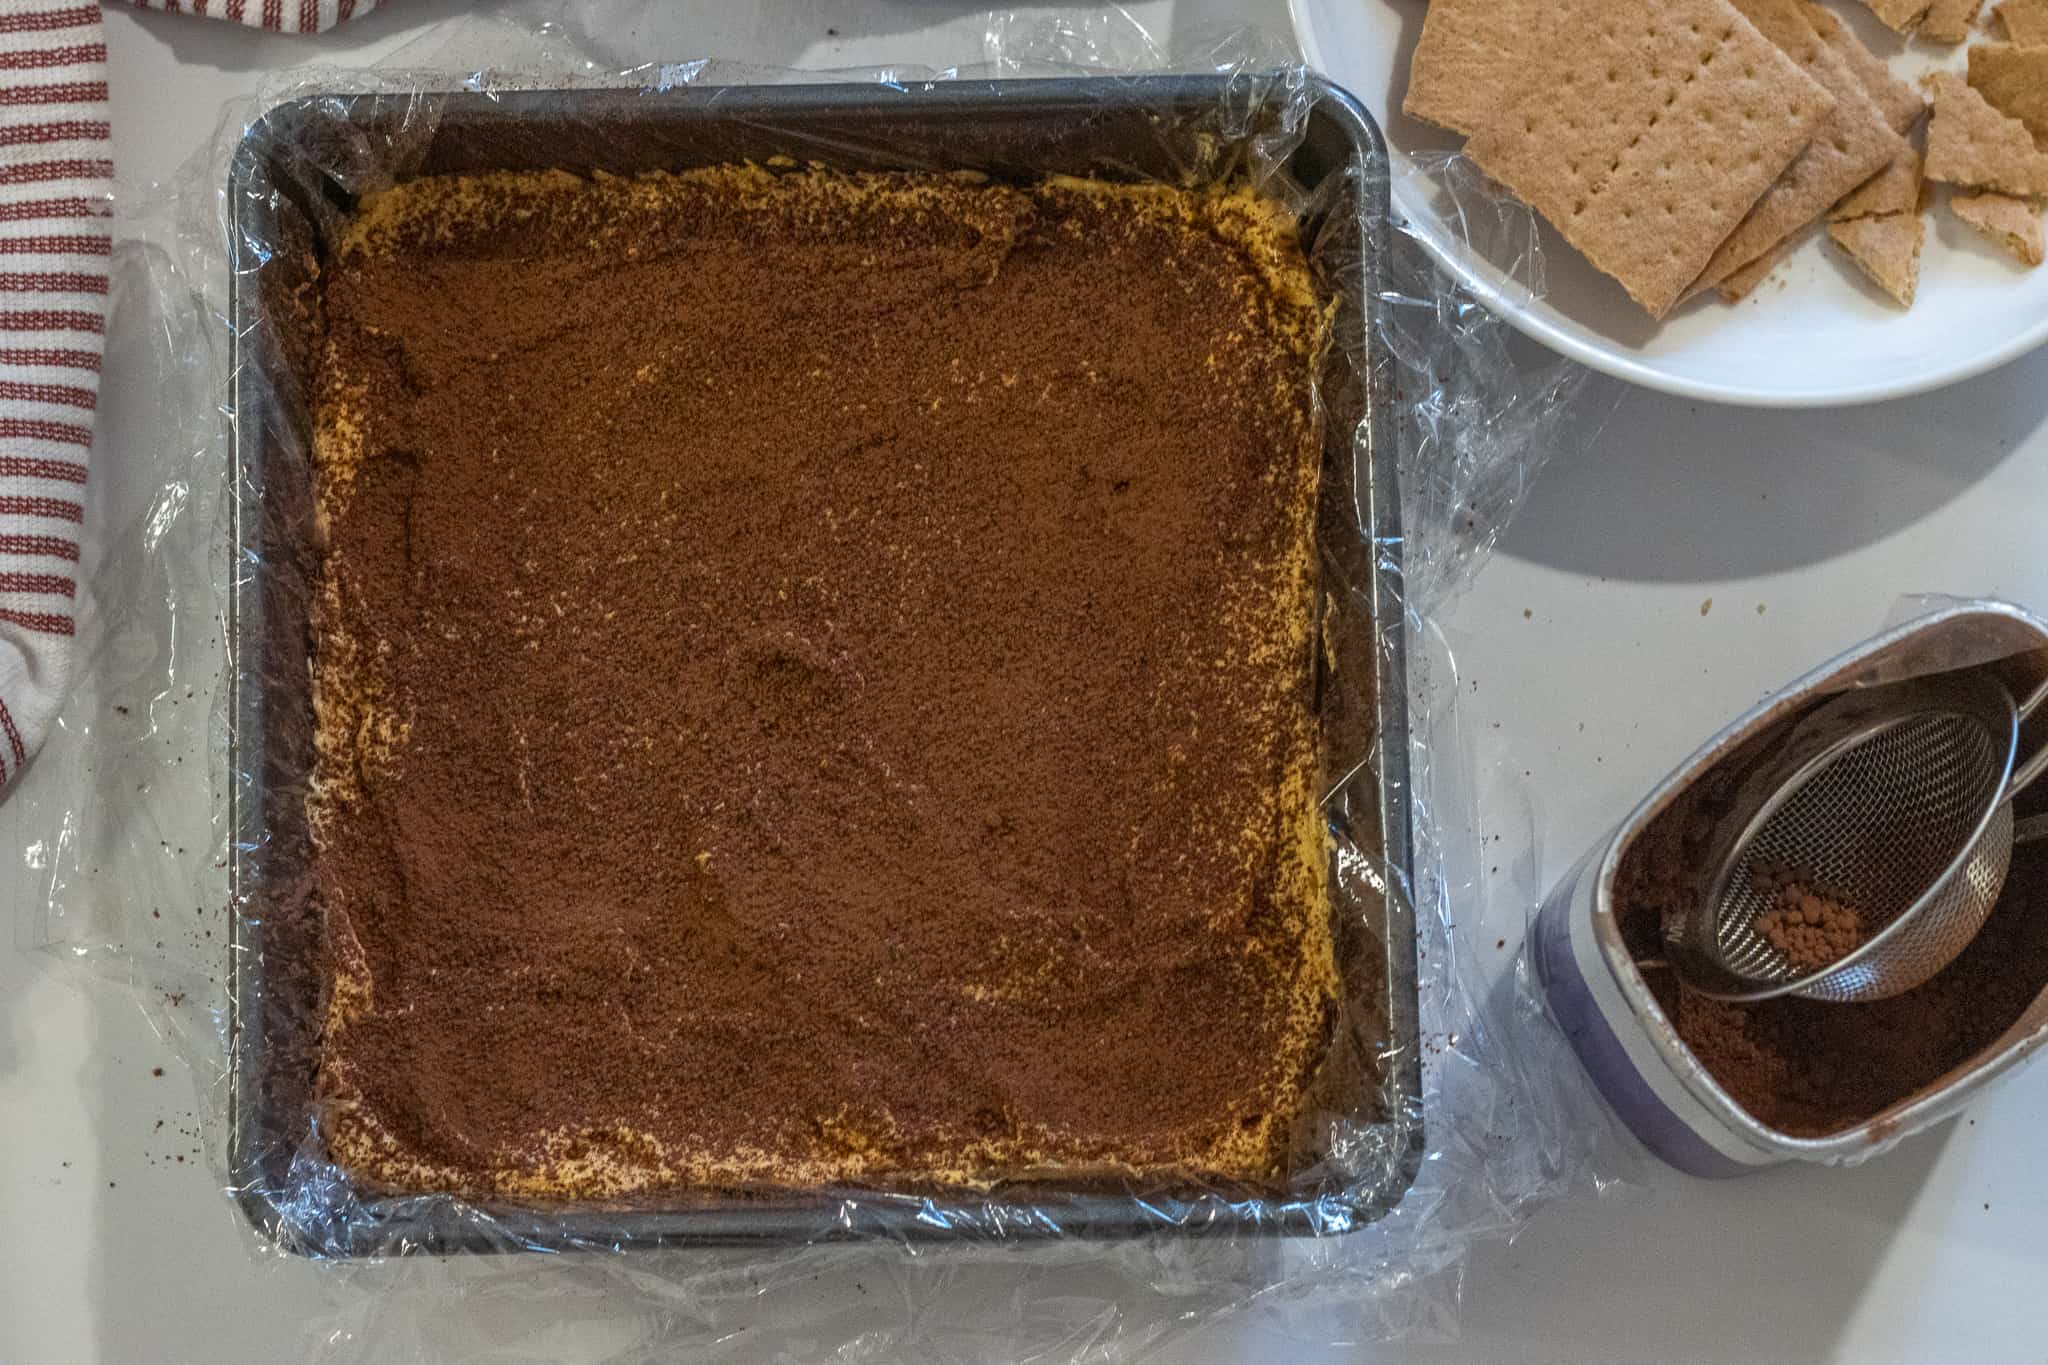 Plastic lined baking dish filled with whipped pumpkin and a layer of cocoa powder next to a plate of graham crackers and a container of cocoa powder